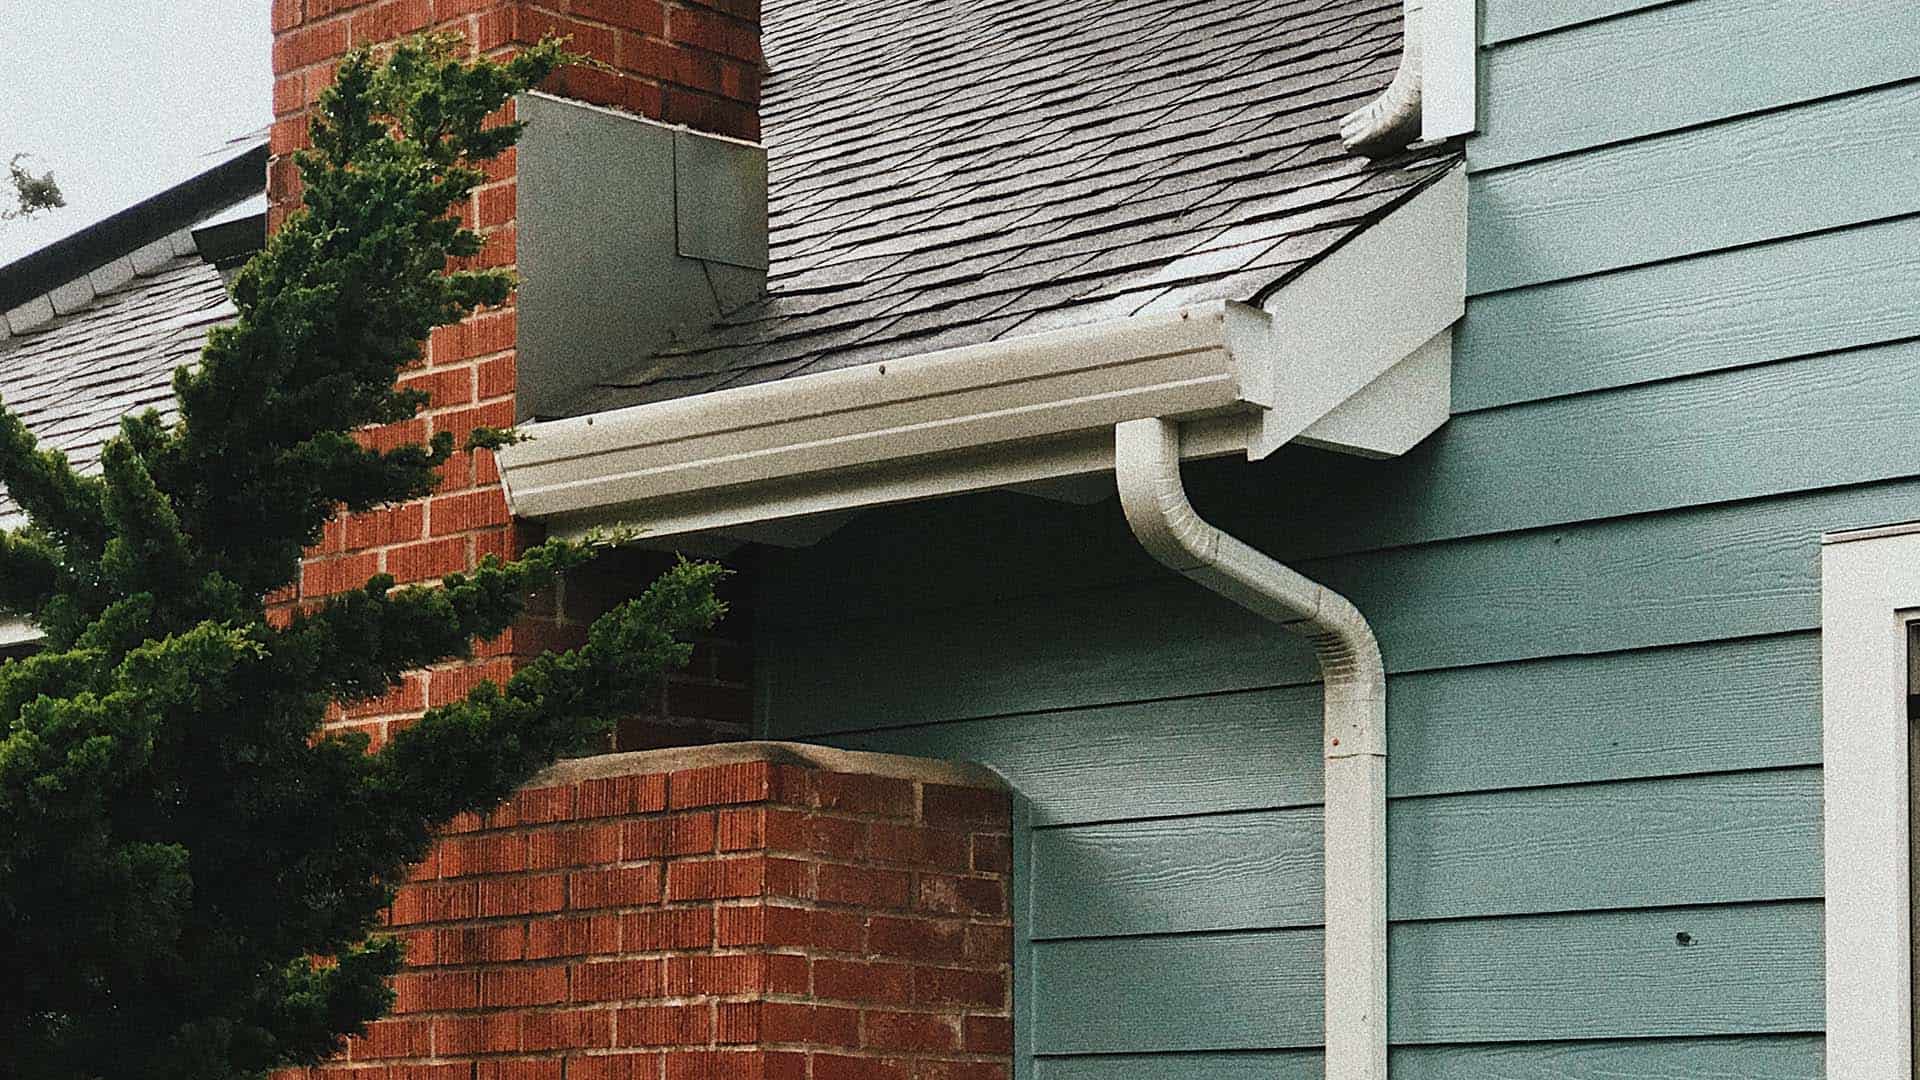 picture of side of a house showing the gutter sidings and chimney